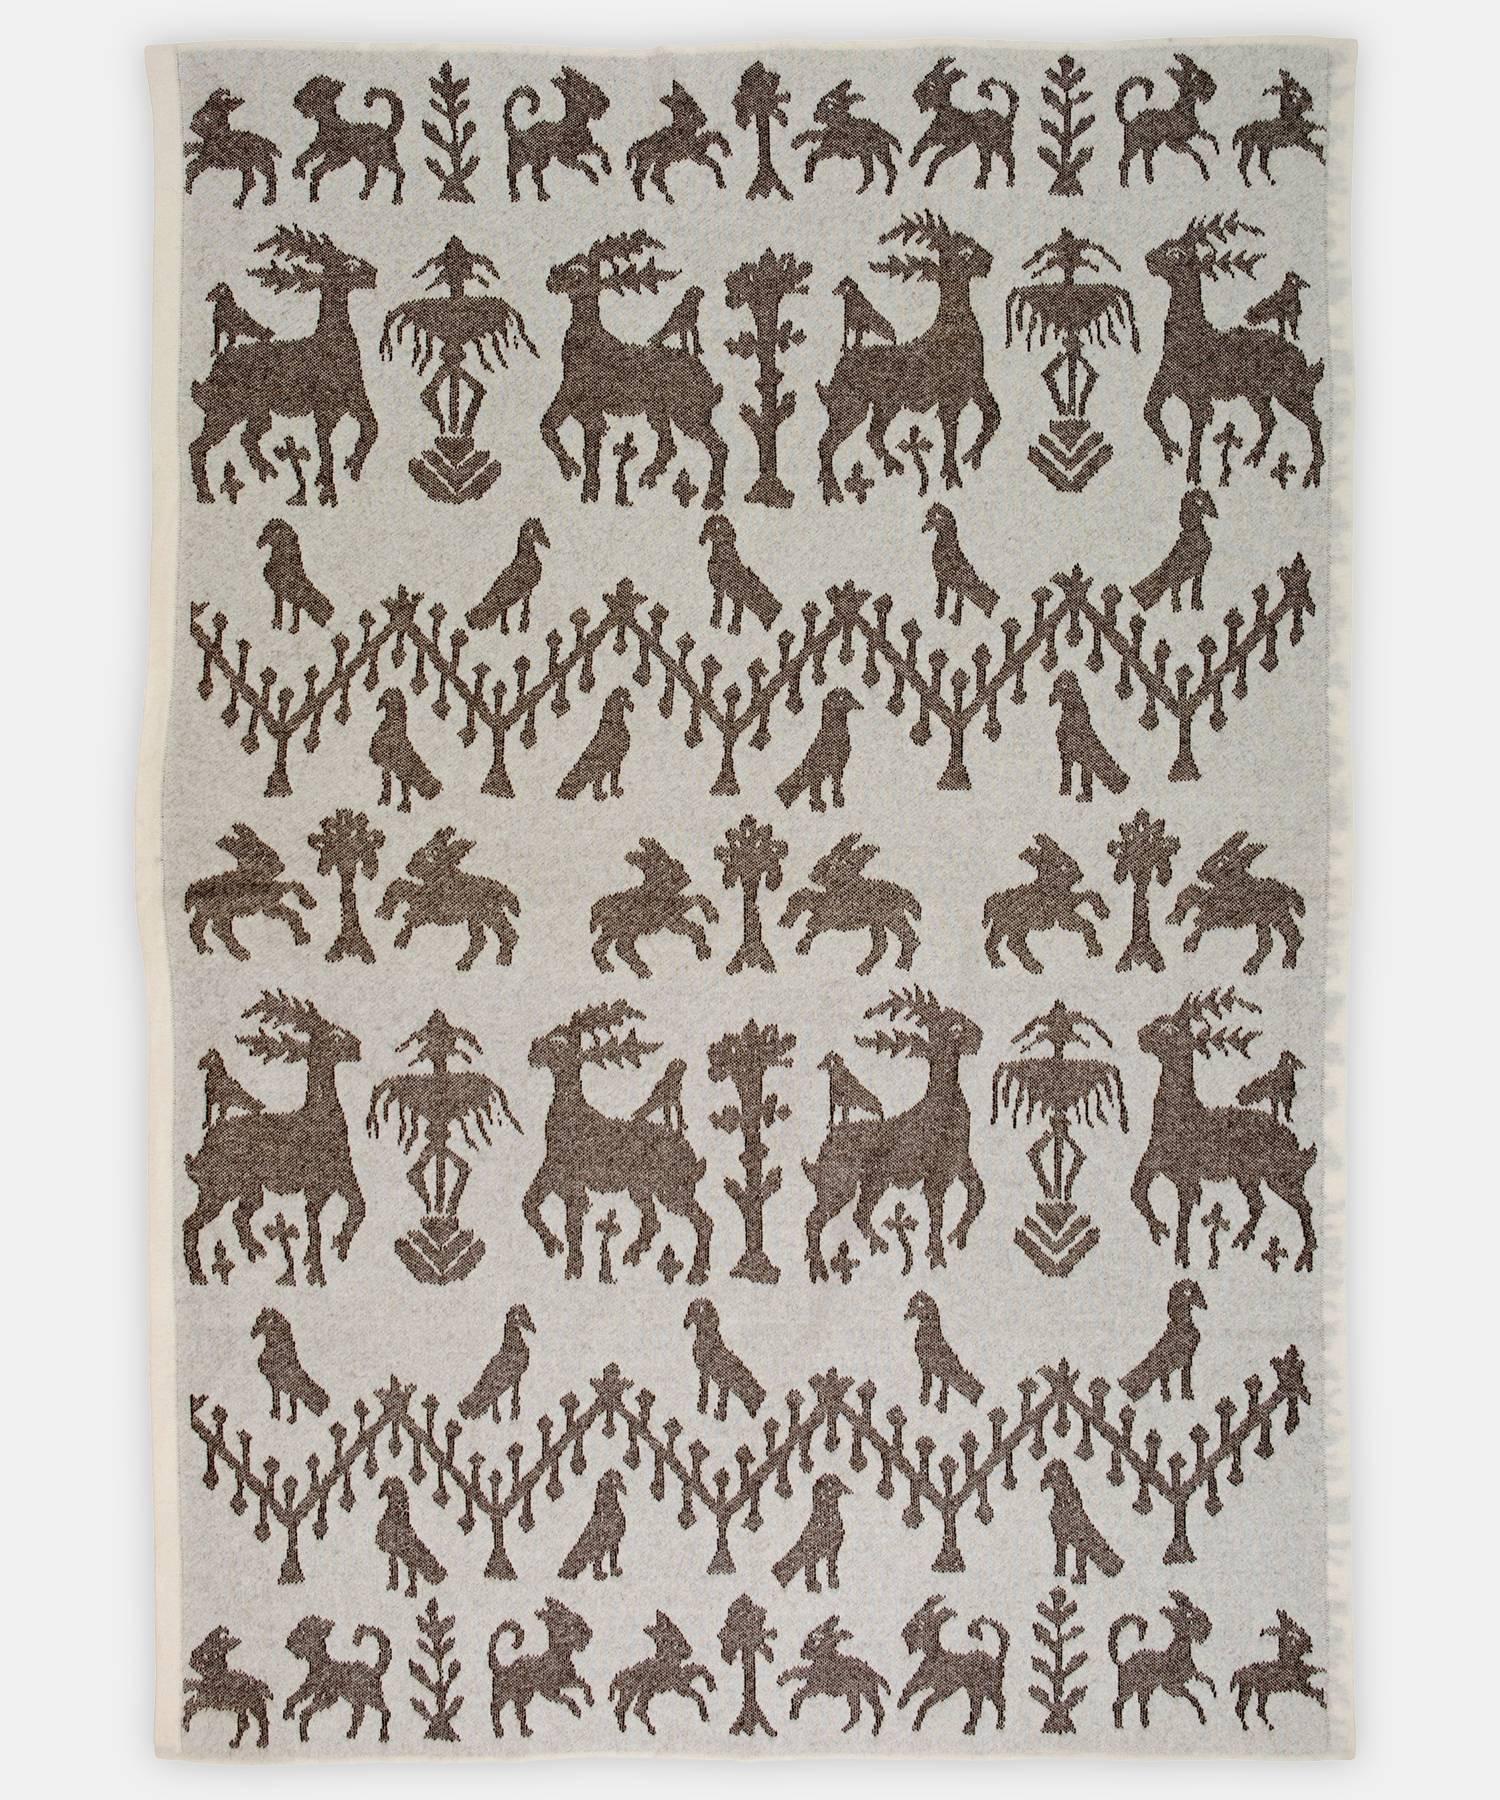 Folklore blanket by Saved, New York 

A playful folk art motif includes creatures of the woods in a jacquard knit. Available in King and Queen sizes, please inquire for pricing, availability, and lead time.

85% cashmere, 15% yak down

Measures: 51